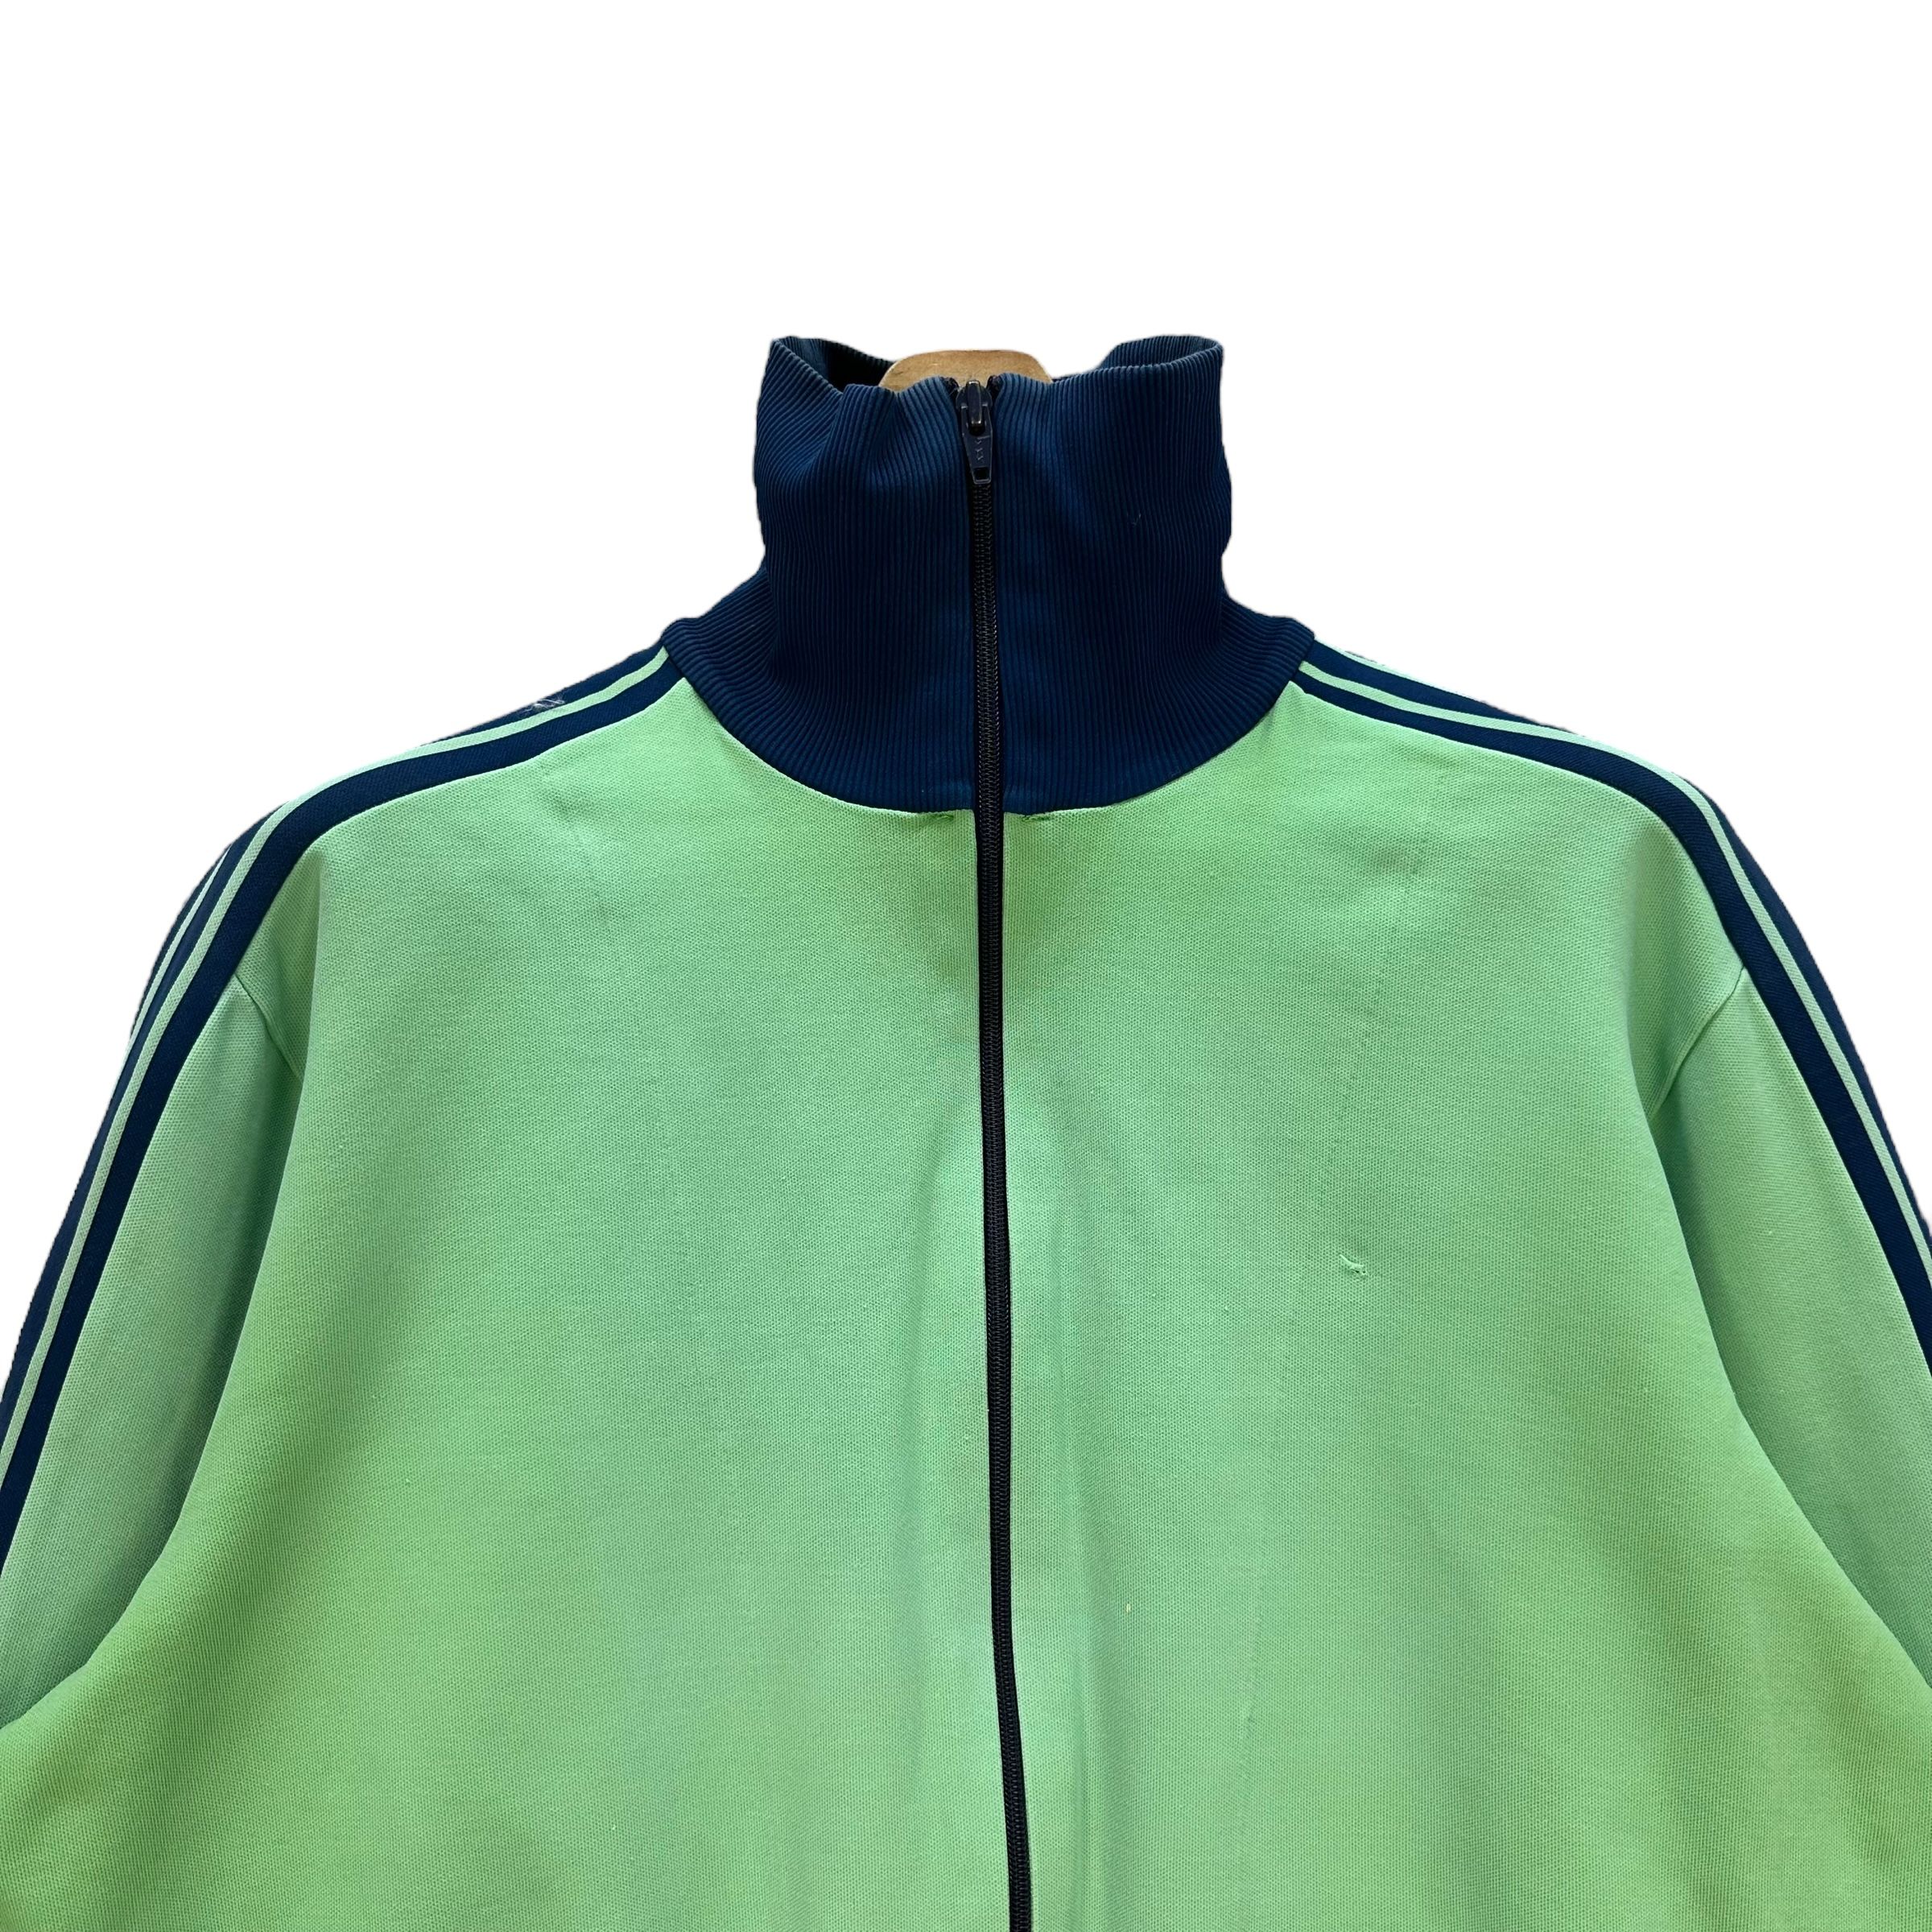 ADIDAS WEST GERMANY GREEN TRACK TOP JACKET #8817-028 - 2